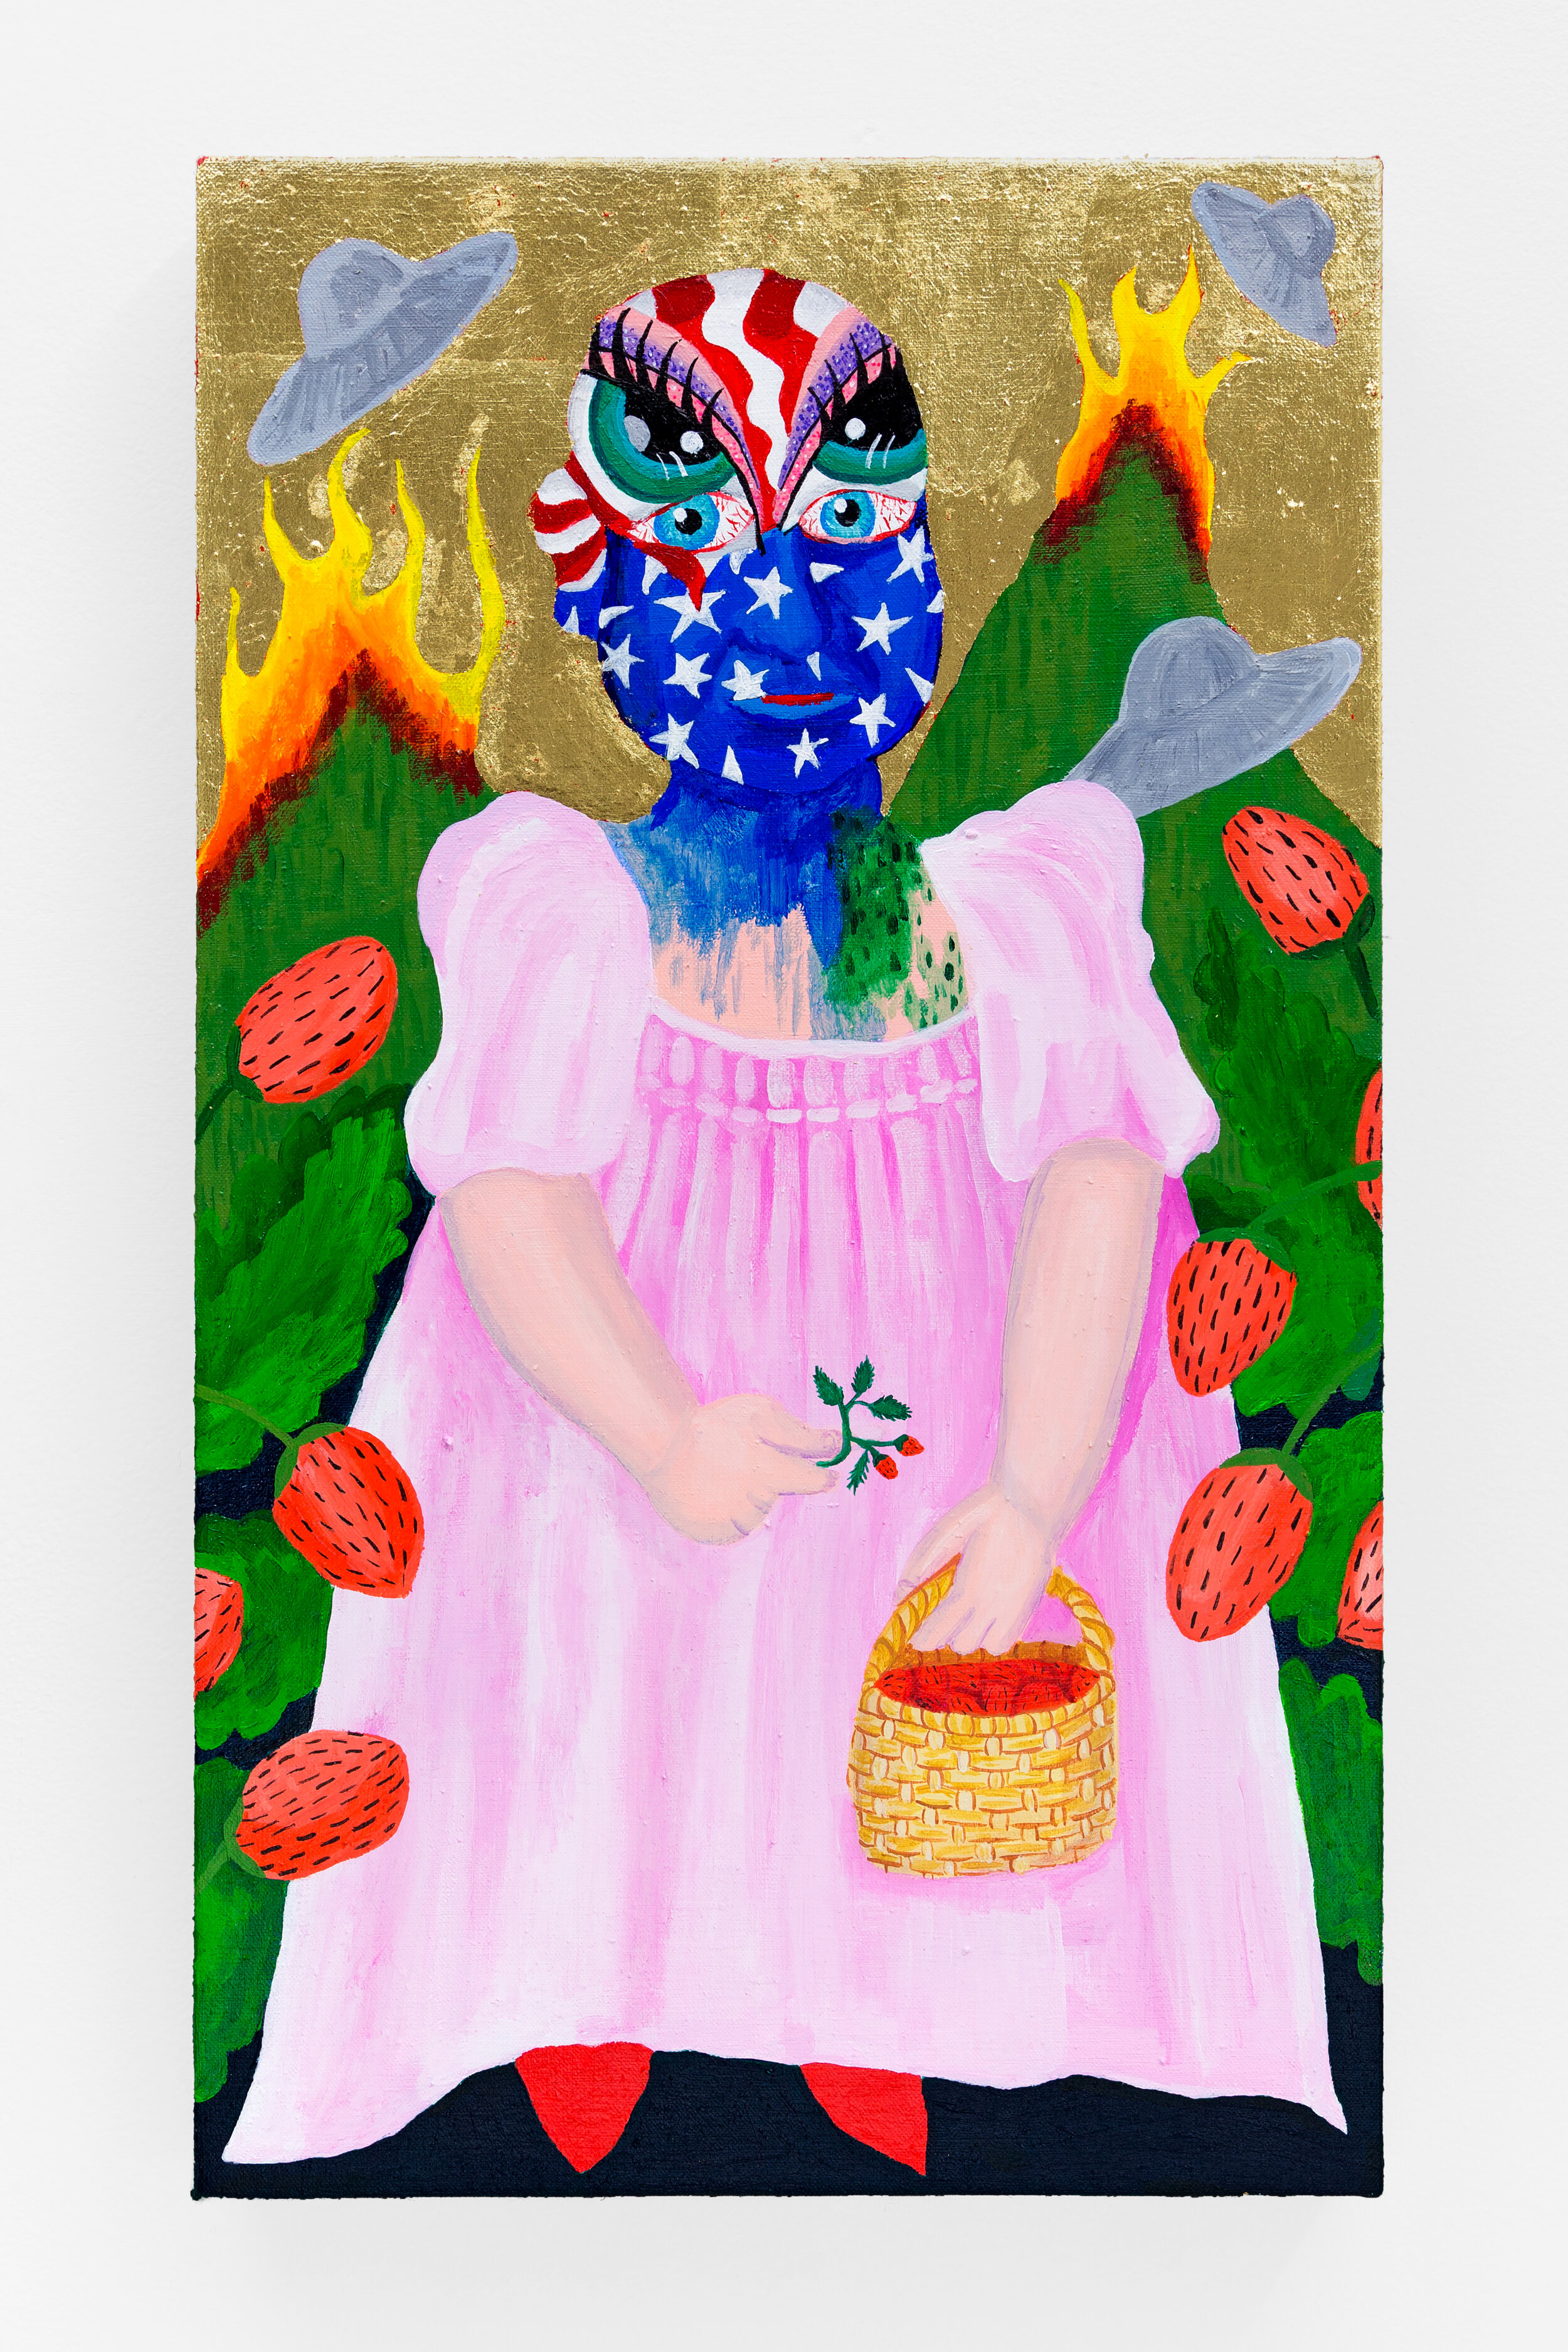  Girl with Wild Strawberries and Wicker Basket (The World Burns), 2018  19.25 x 11.5 x 1.5 inches (48.89 x 29.21 x 3.81 cm.)  Acrylic and gold leaf on linen 